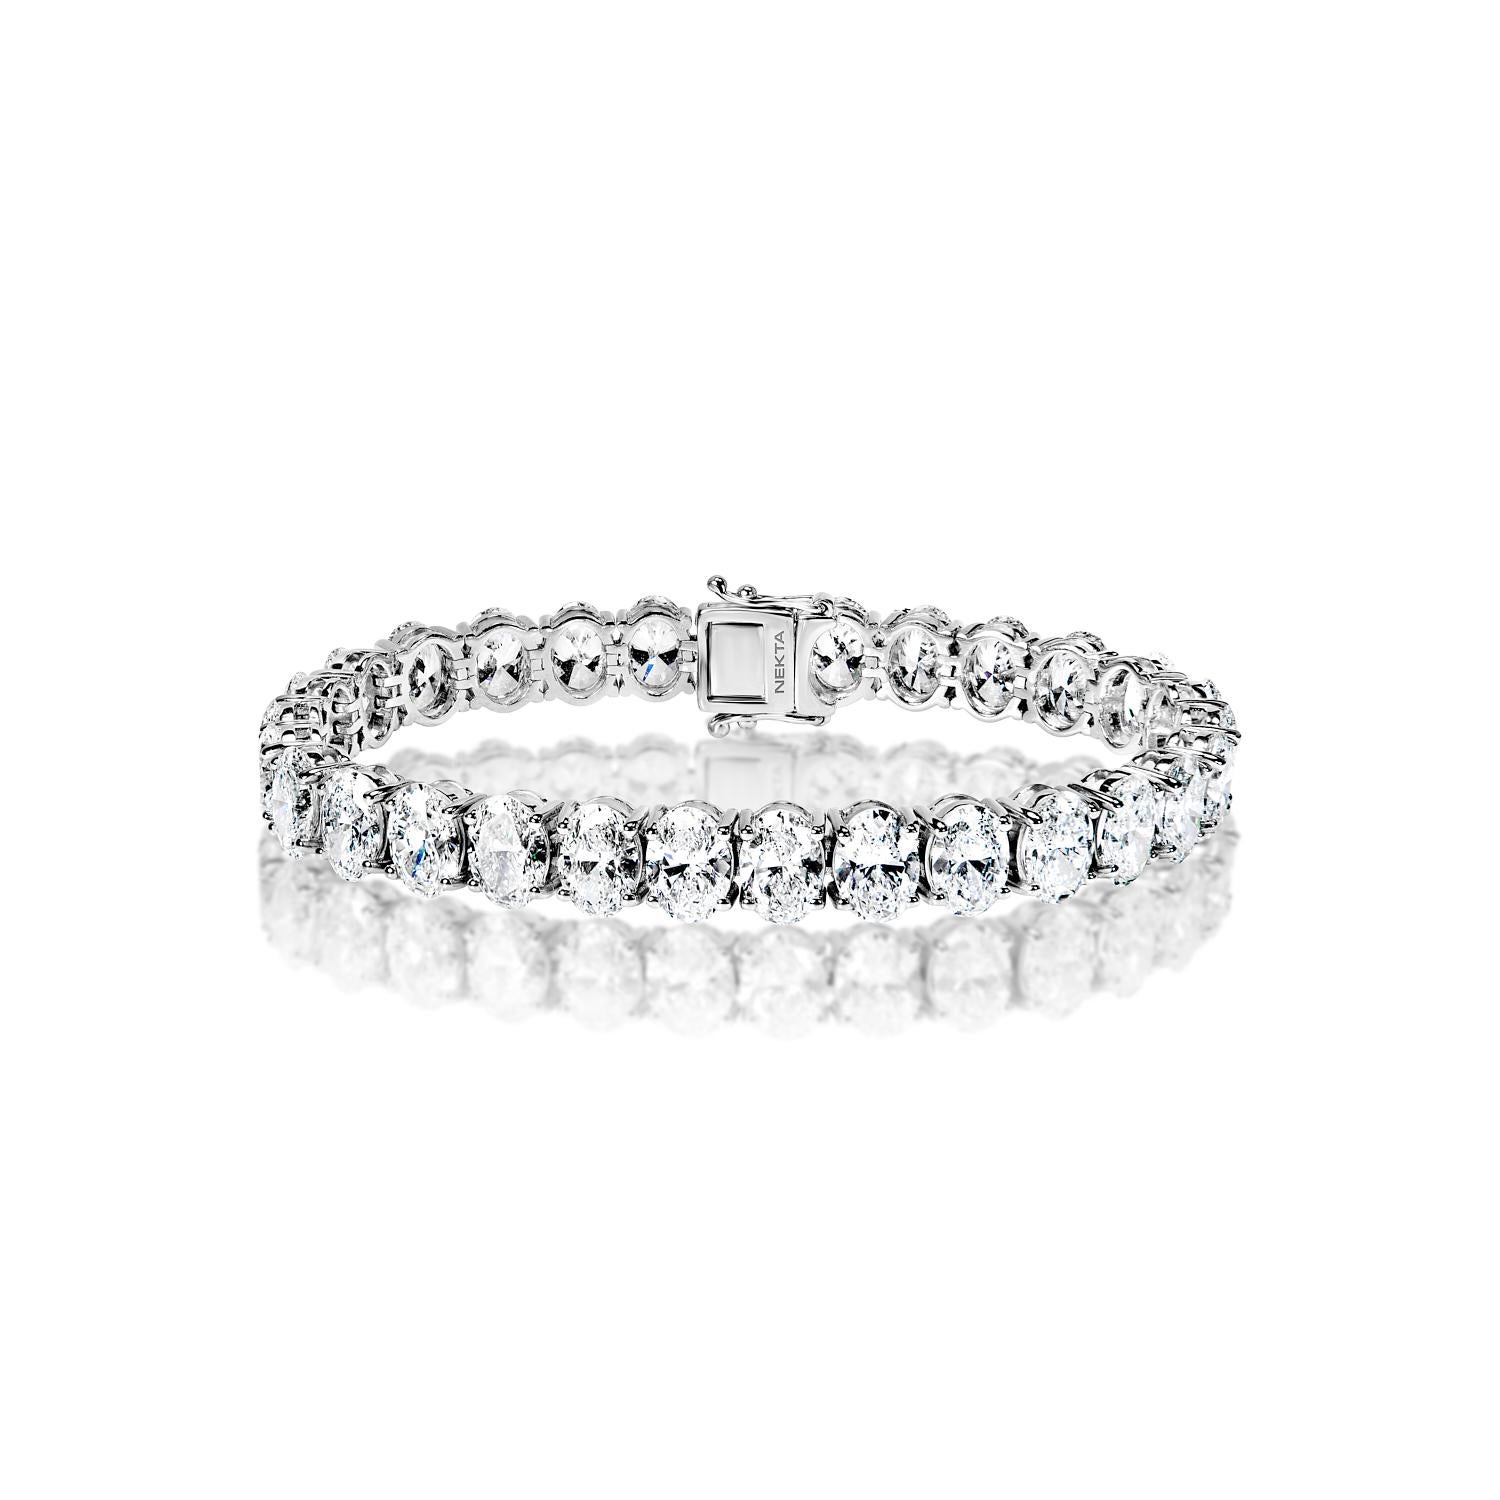 The LANORA 30.45 Carat Single Row Diamond Tennis Bracelet features OVAL CUT DIAMONDS brilliants weighing a total of approximately 30.45 carats, set in 14K White Gold.

Diamonds
Diamond Size: 30.45 Carats
Diamond Shape: Oval Cut

Setting
Metal: 14